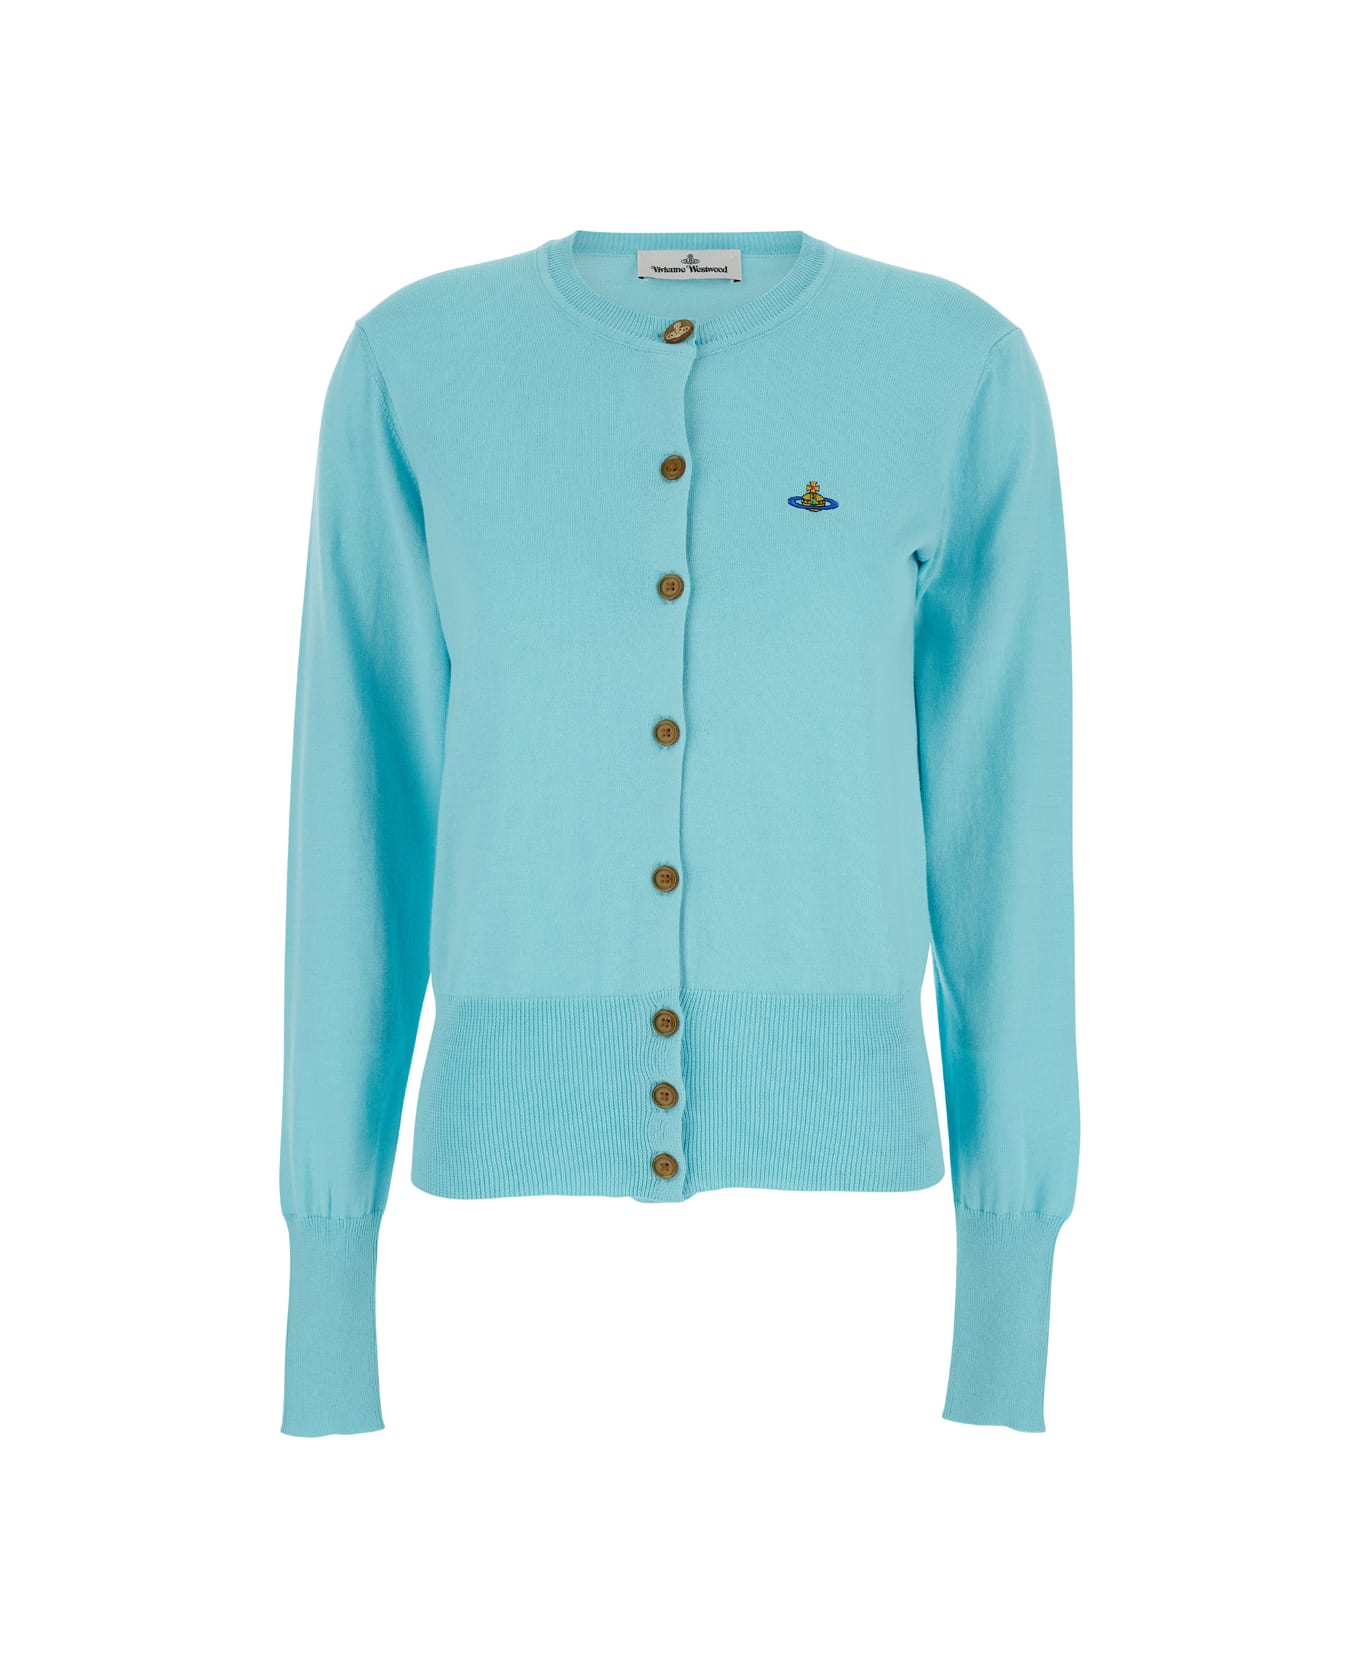 Vivienne Westwood Light Blue Cardigan With Buttons In Cotton Woman - Light blue